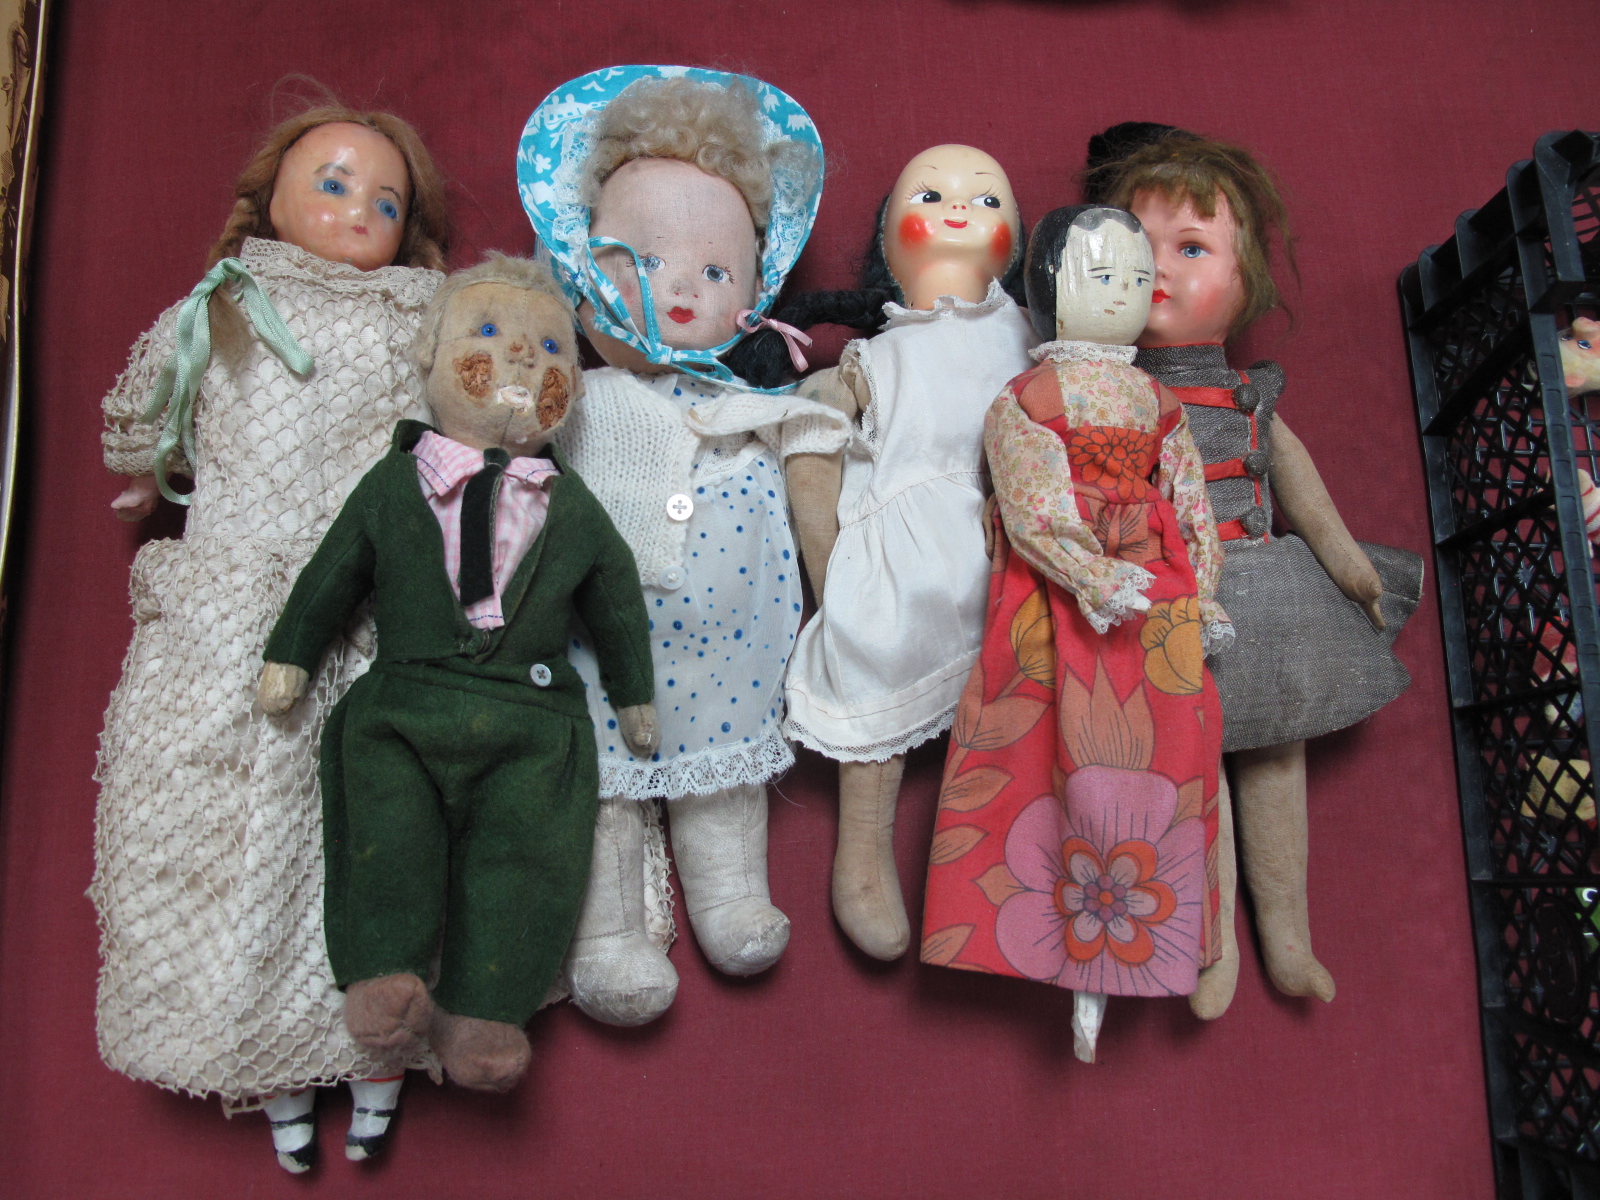 A Quantity of XX Century Dolls, including cloth, felt, wax, wooden, all showing signs of wear.